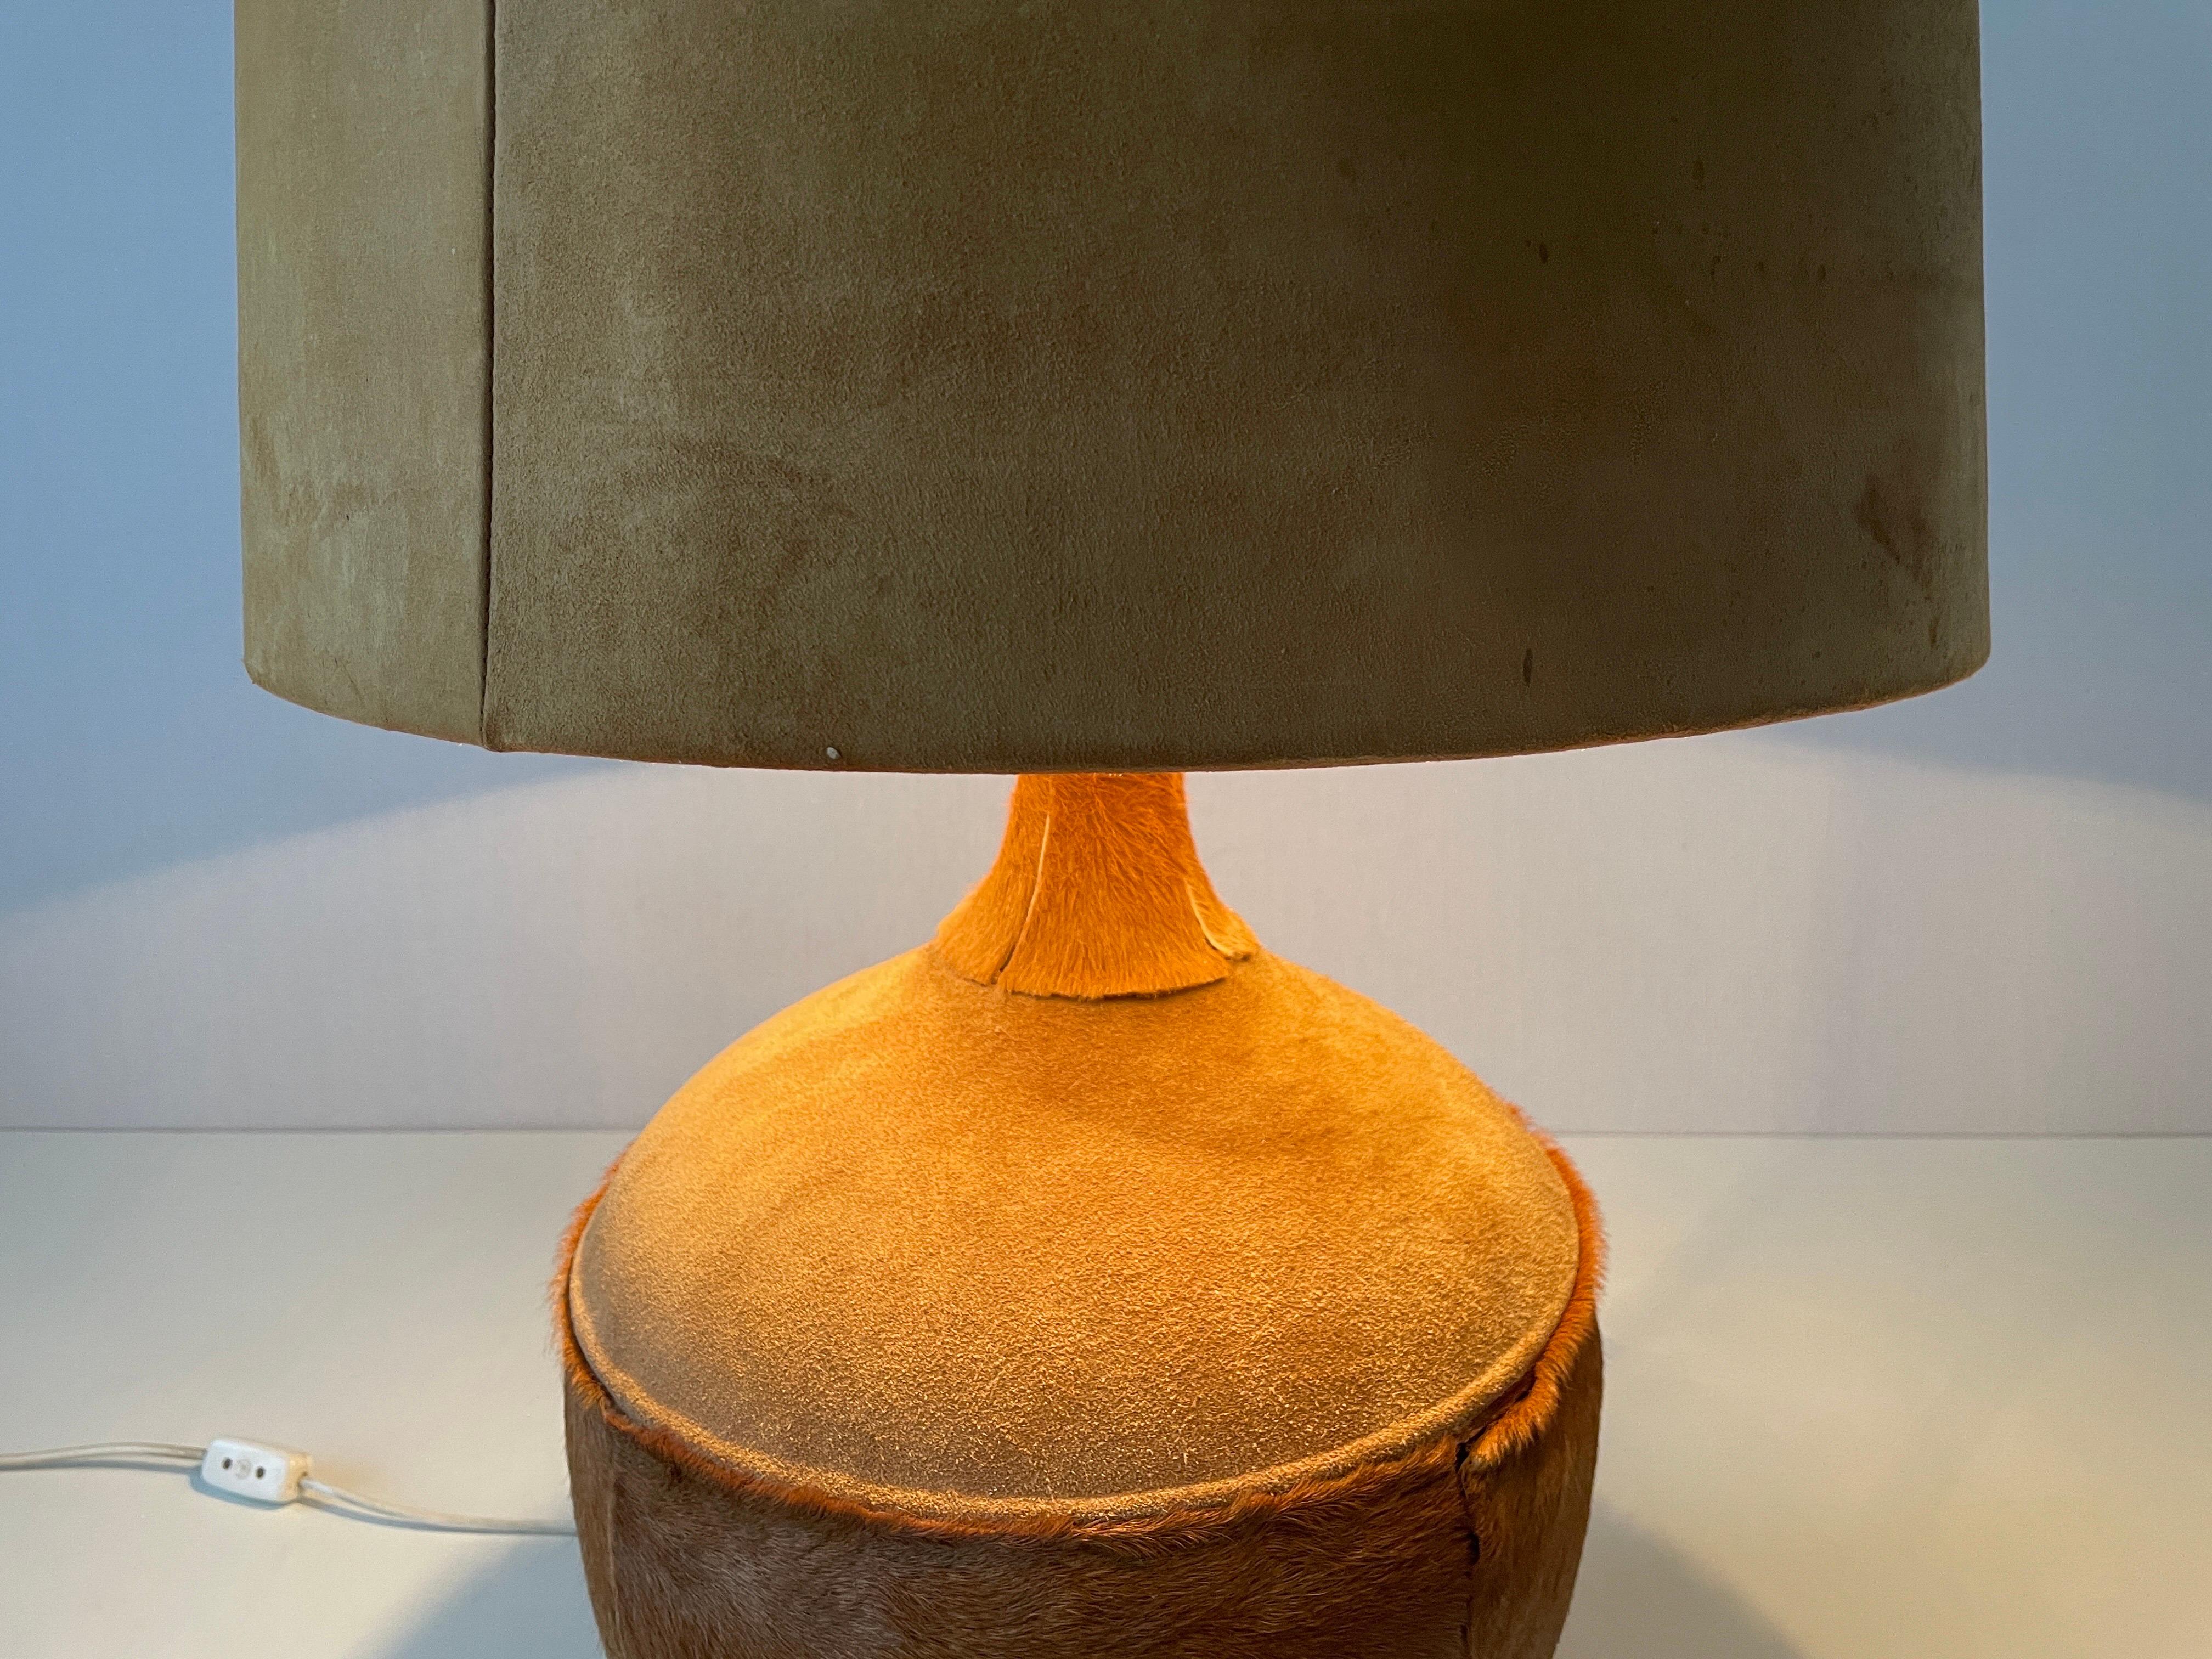 Tan Suede Leather and Glass Shade Floor or Table Lamp, 1960s, Denmark For Sale 10